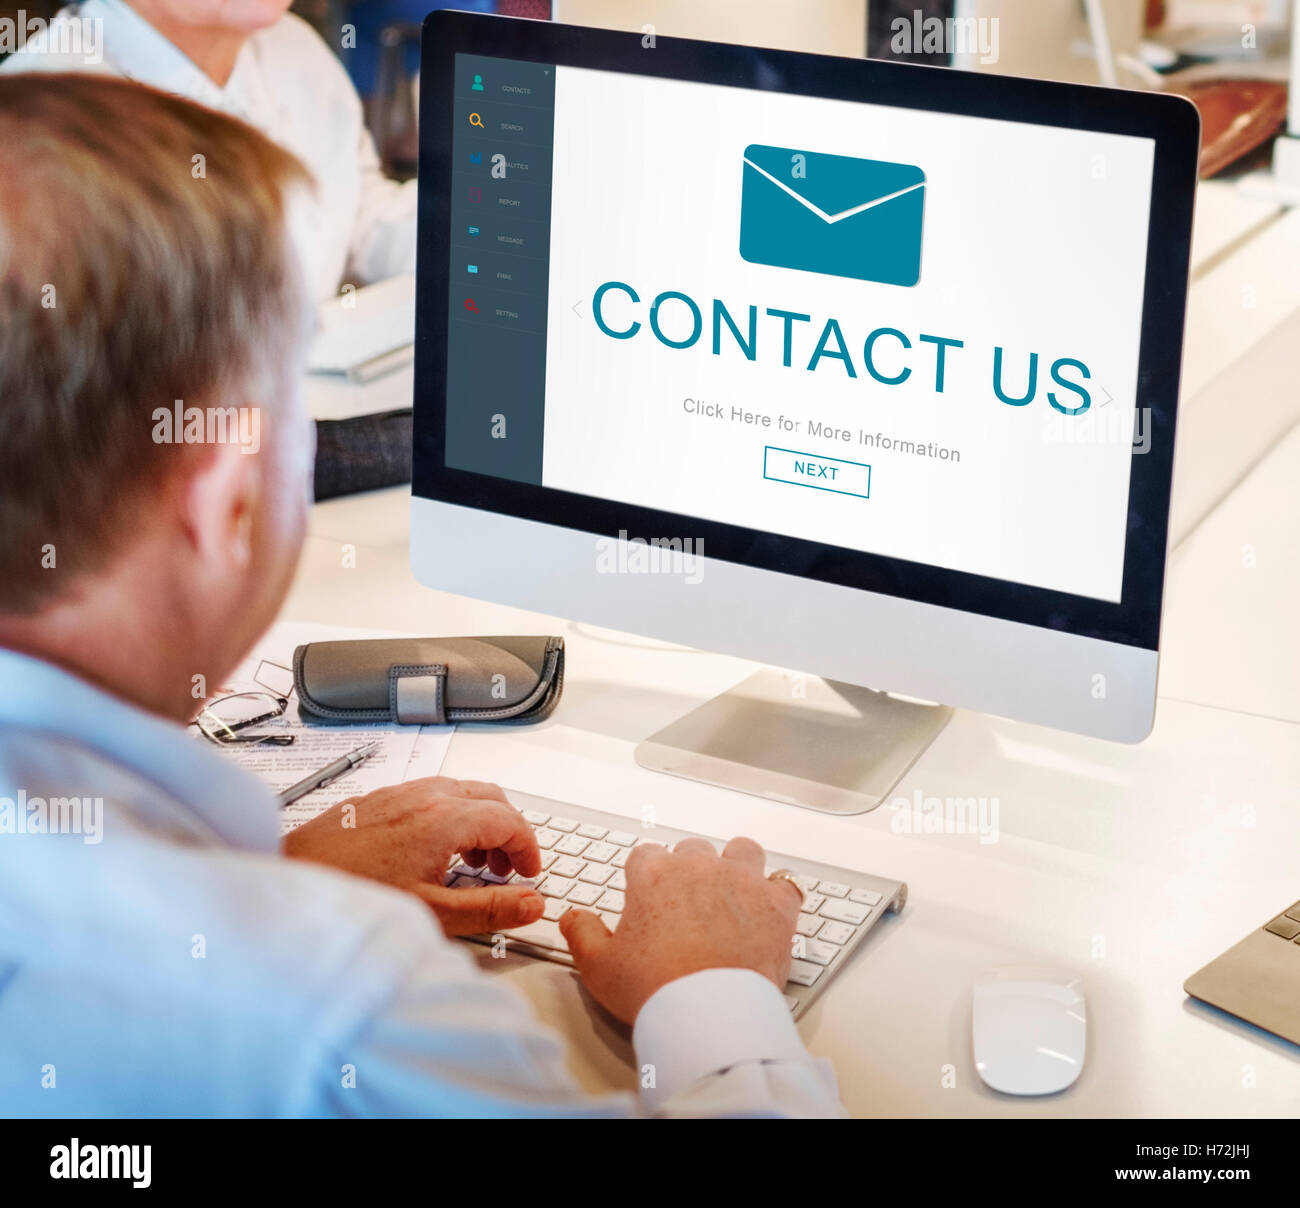 Contact Us Messaging Envelope Online Technology Concept Stock Photo